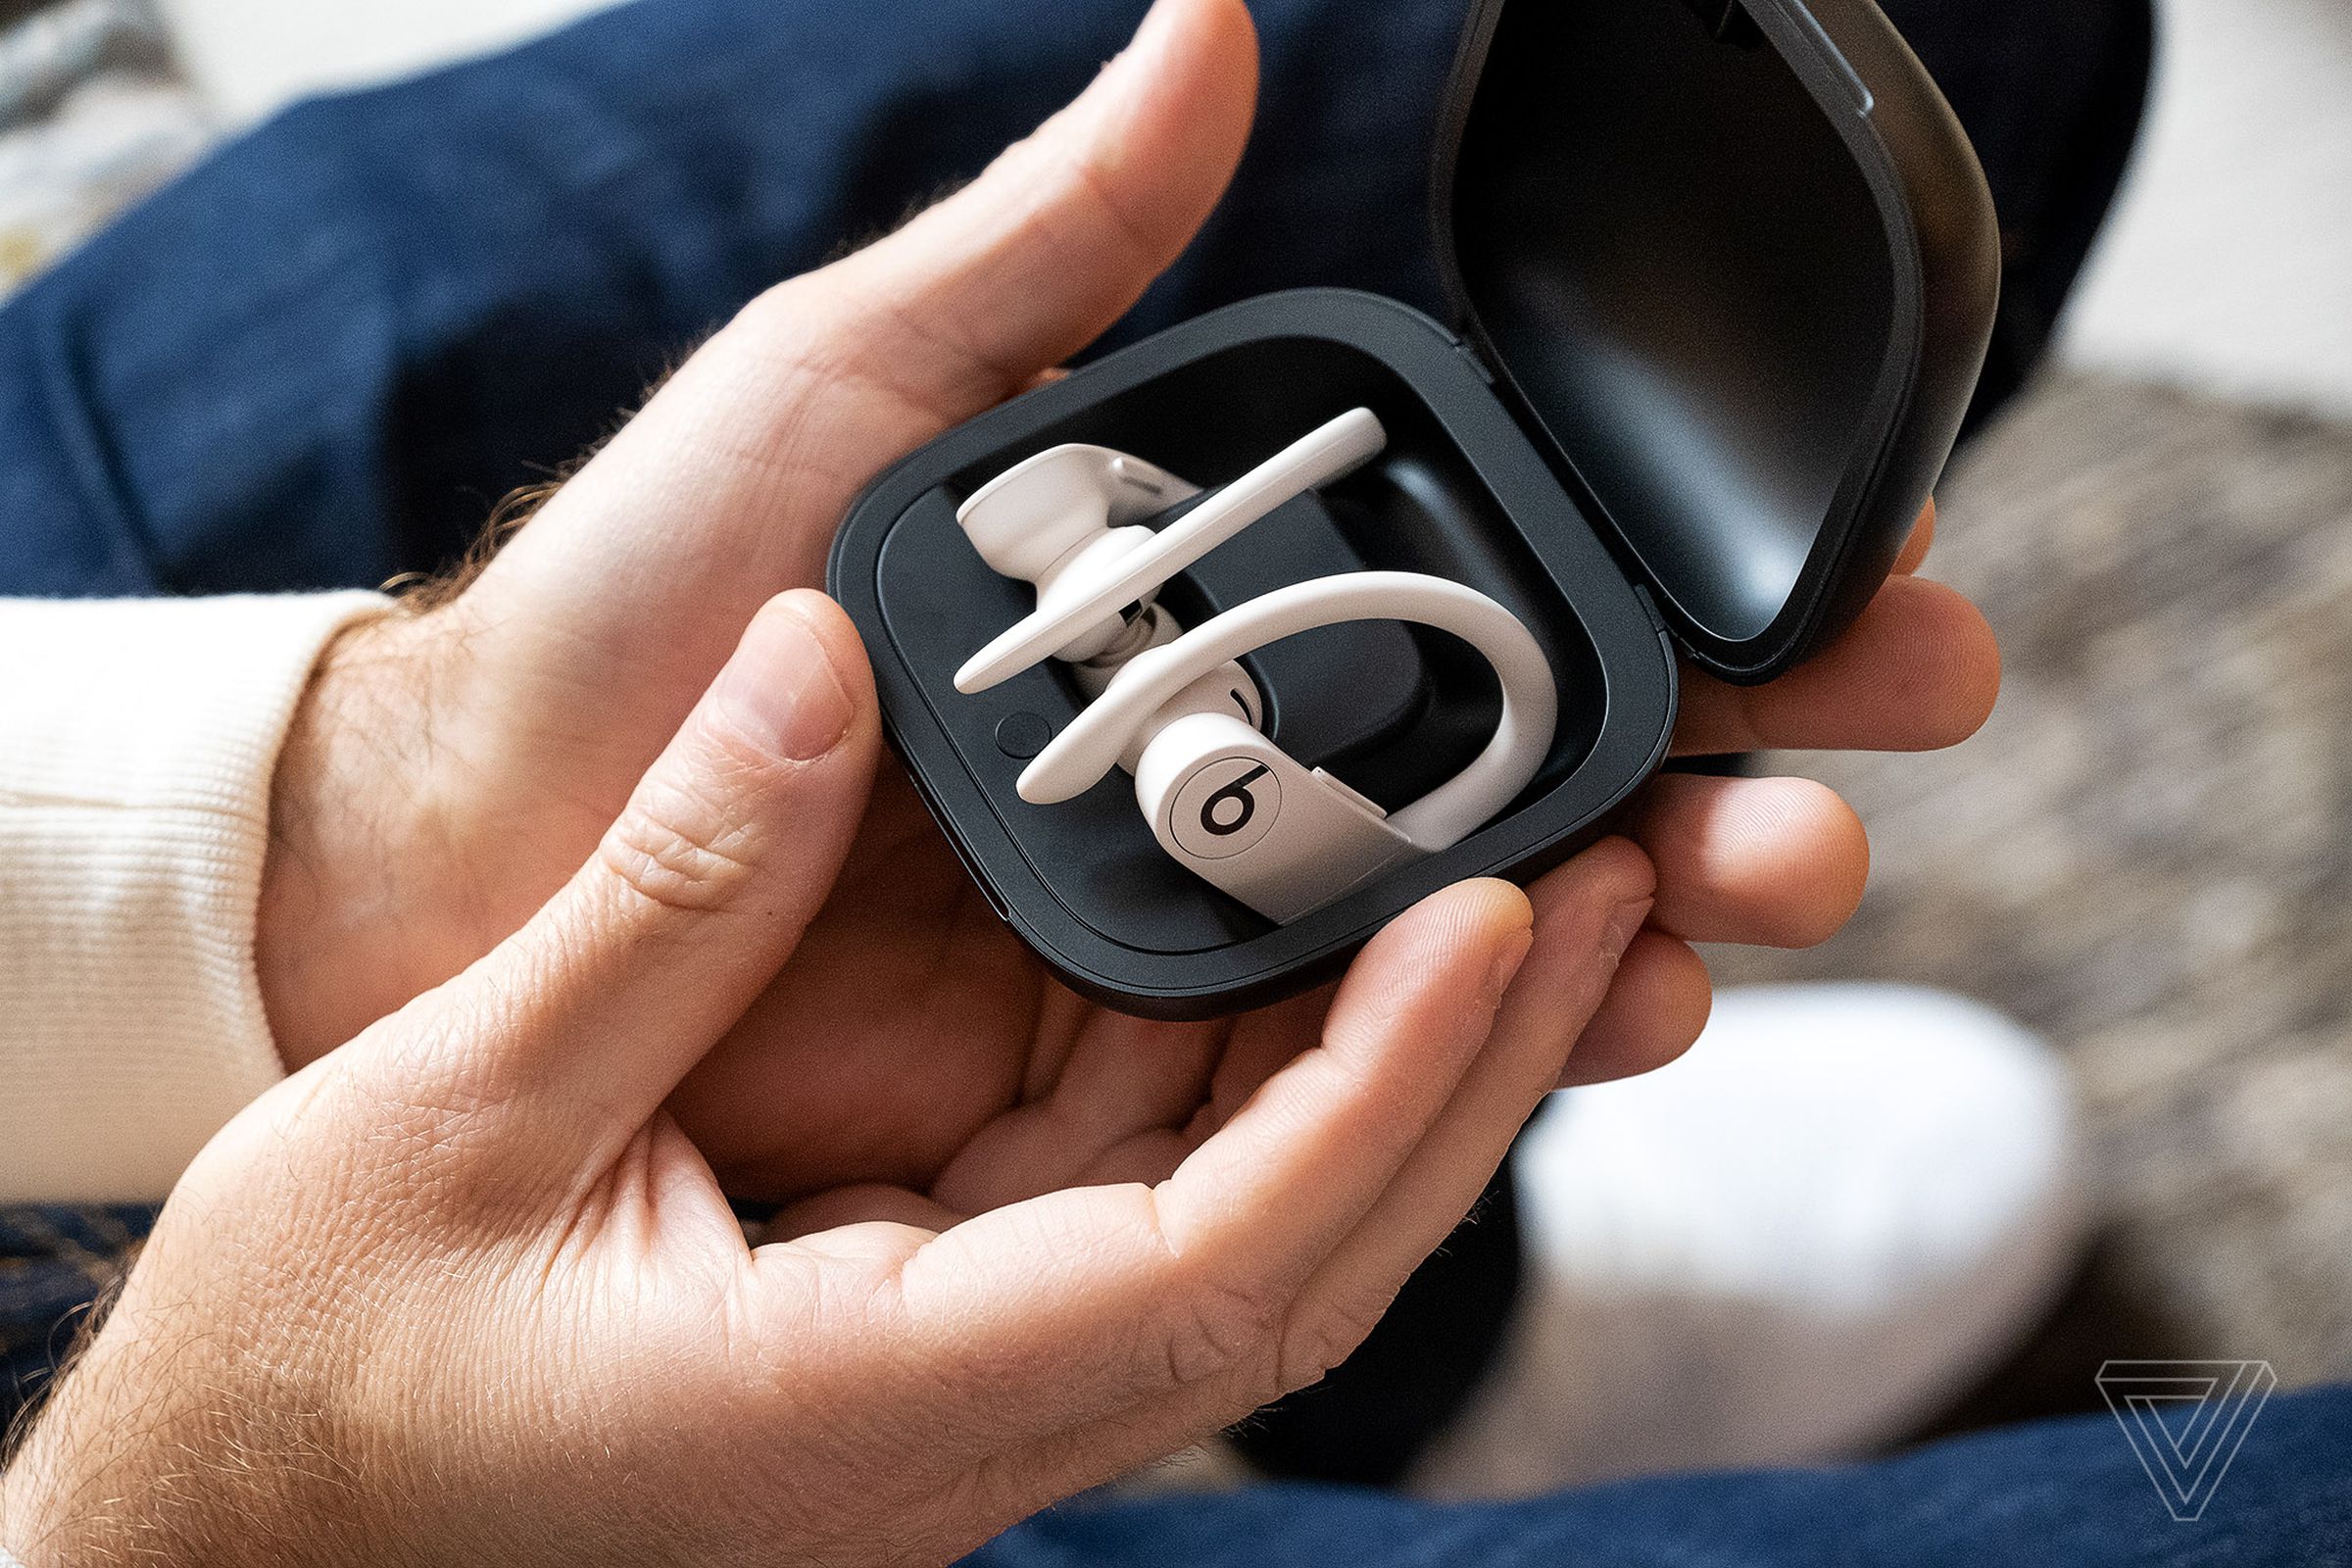 Powerbeats Pro earbuds pictured inside their case in someone’s hand.